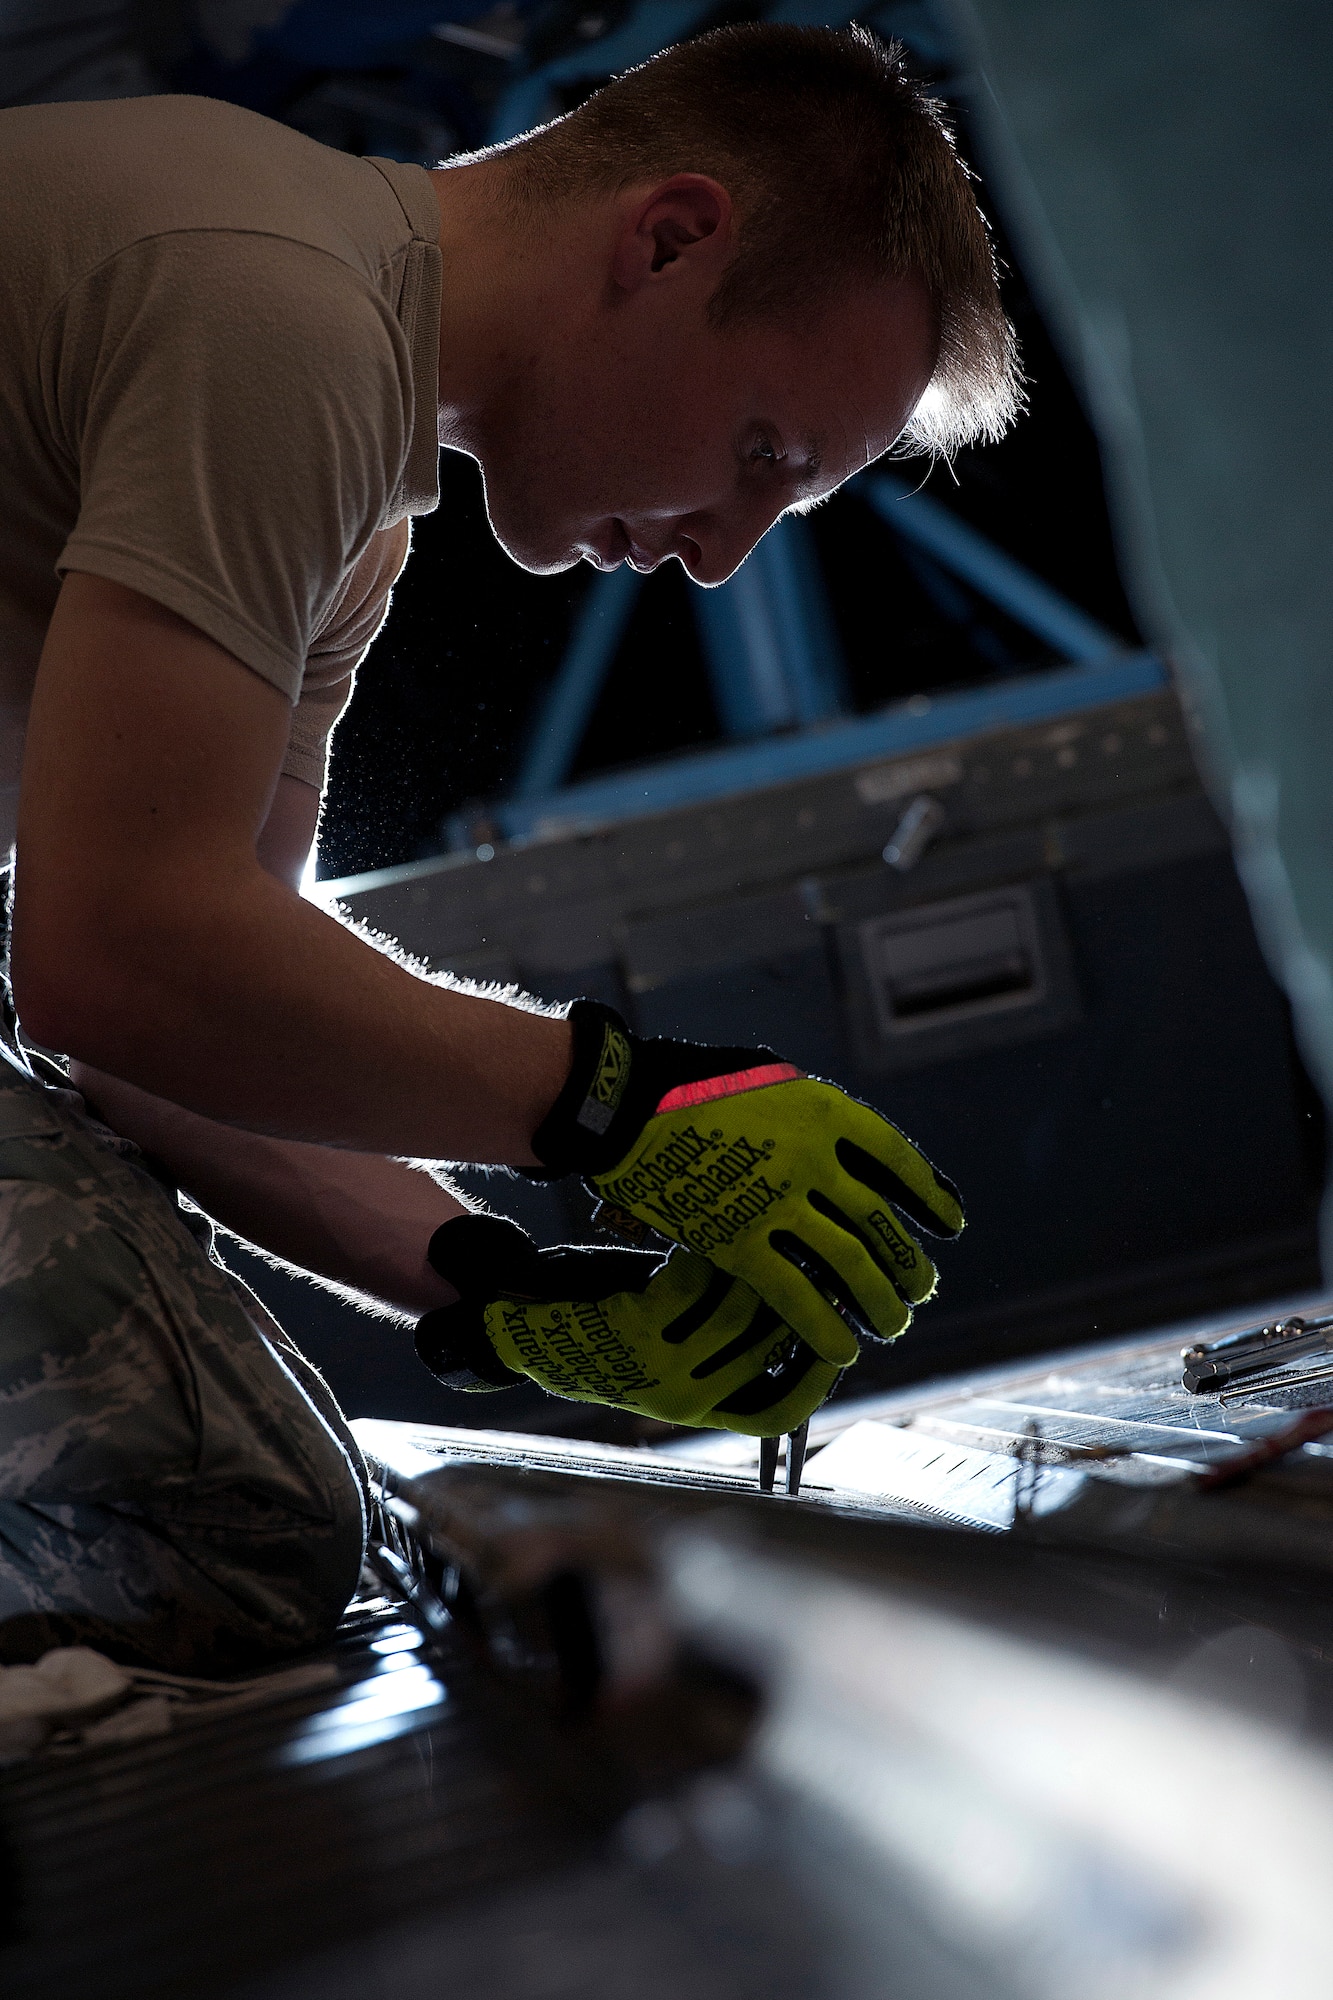 ALTUS AIR FORCE BASE, Okla. – Senior Airman Tyler Shelly, 97th Air Mobility Wing Maintenance crew chief, inspects the airdrop railings of a C-17 Globemaster III cargo aircraft during a 720-day home station refurbishing Oct. 10, 2013. With improved capabilities of potential adversaries, the airdrop system must remain serviceable to meet air mobility requirements, particularly in support of large or heavy sized cargo used to accomplish the mission Altus AFB provides. (U.S. Air Force photo by Senior Airman Jesse Lopez/Released)